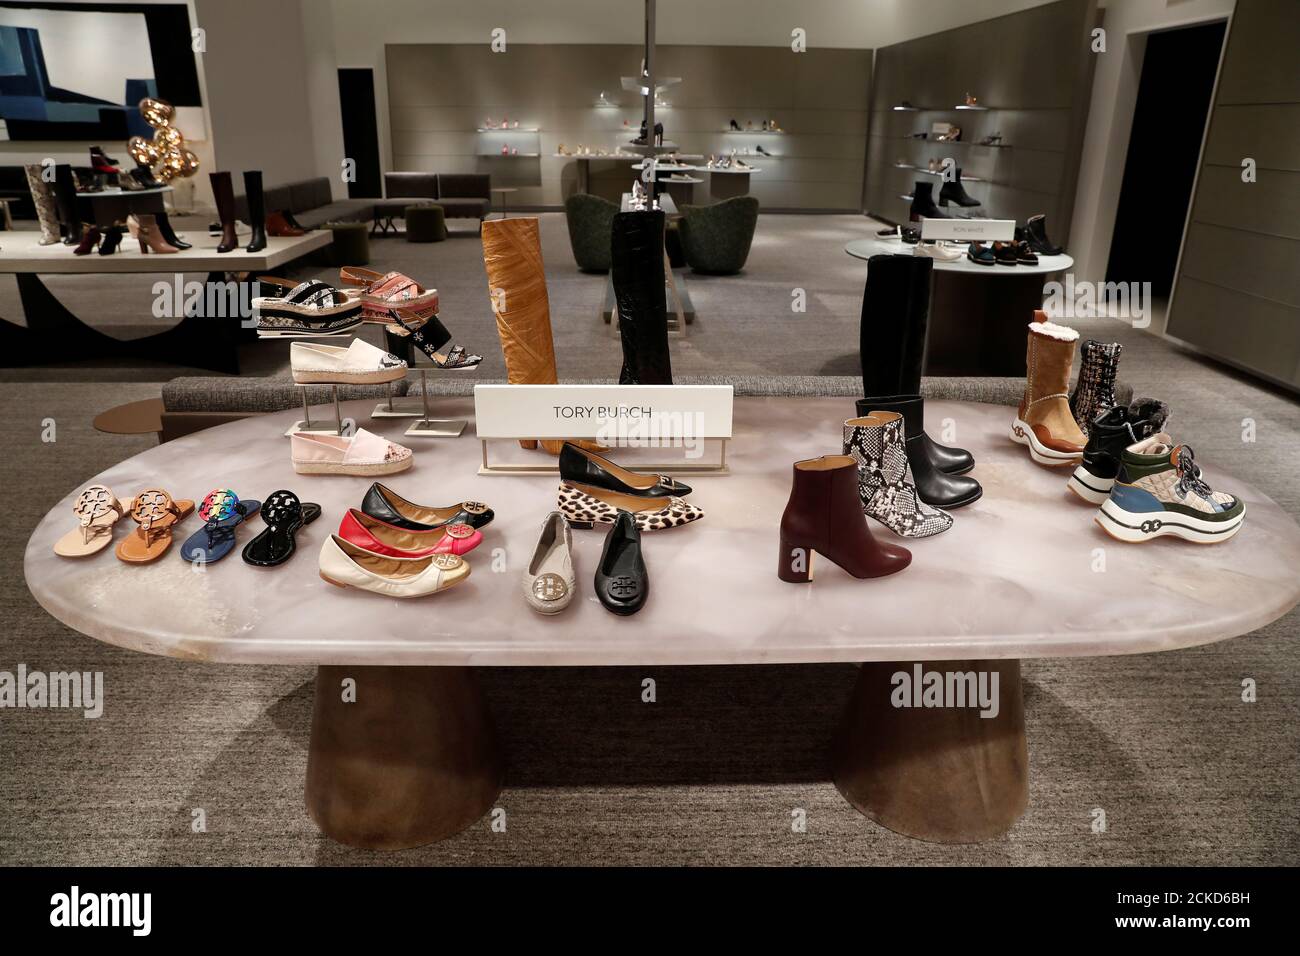 Designer Tory Burch shoes are seen on display at the Nordstrom flagship  store during a media preview in New York, ., October 21, 2019.  REUTERS/Shannon Stapleton Stock Photo - Alamy